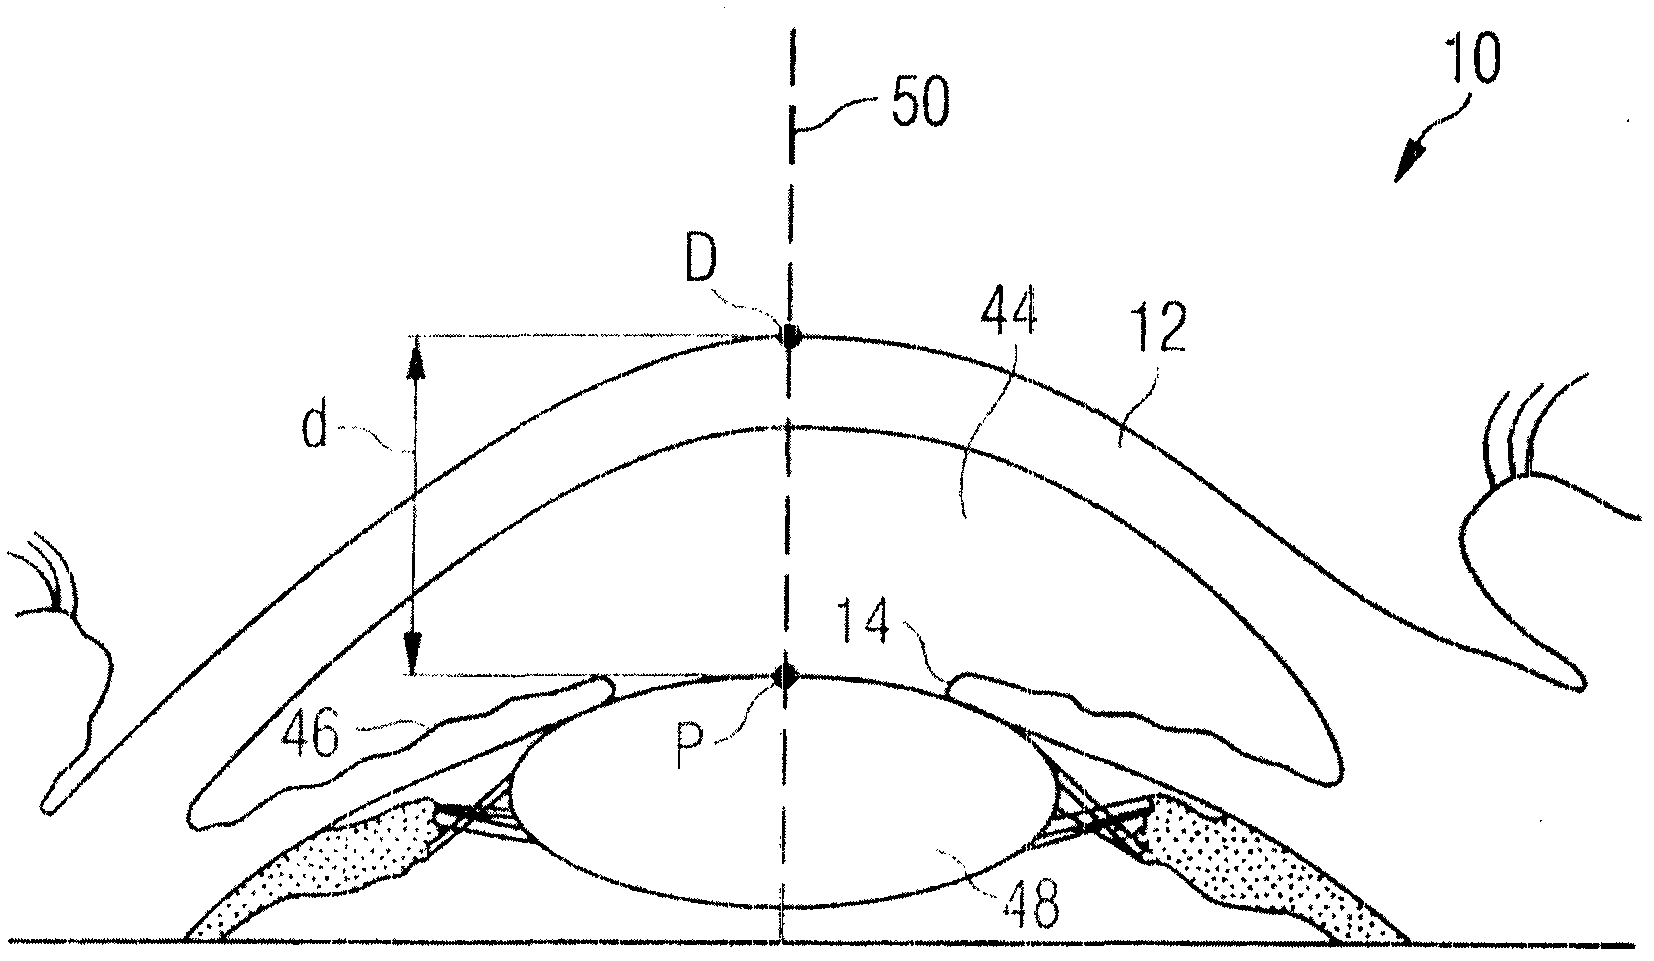 Device, method and control program for ophthalmologic, particularly refractive, laser surgery